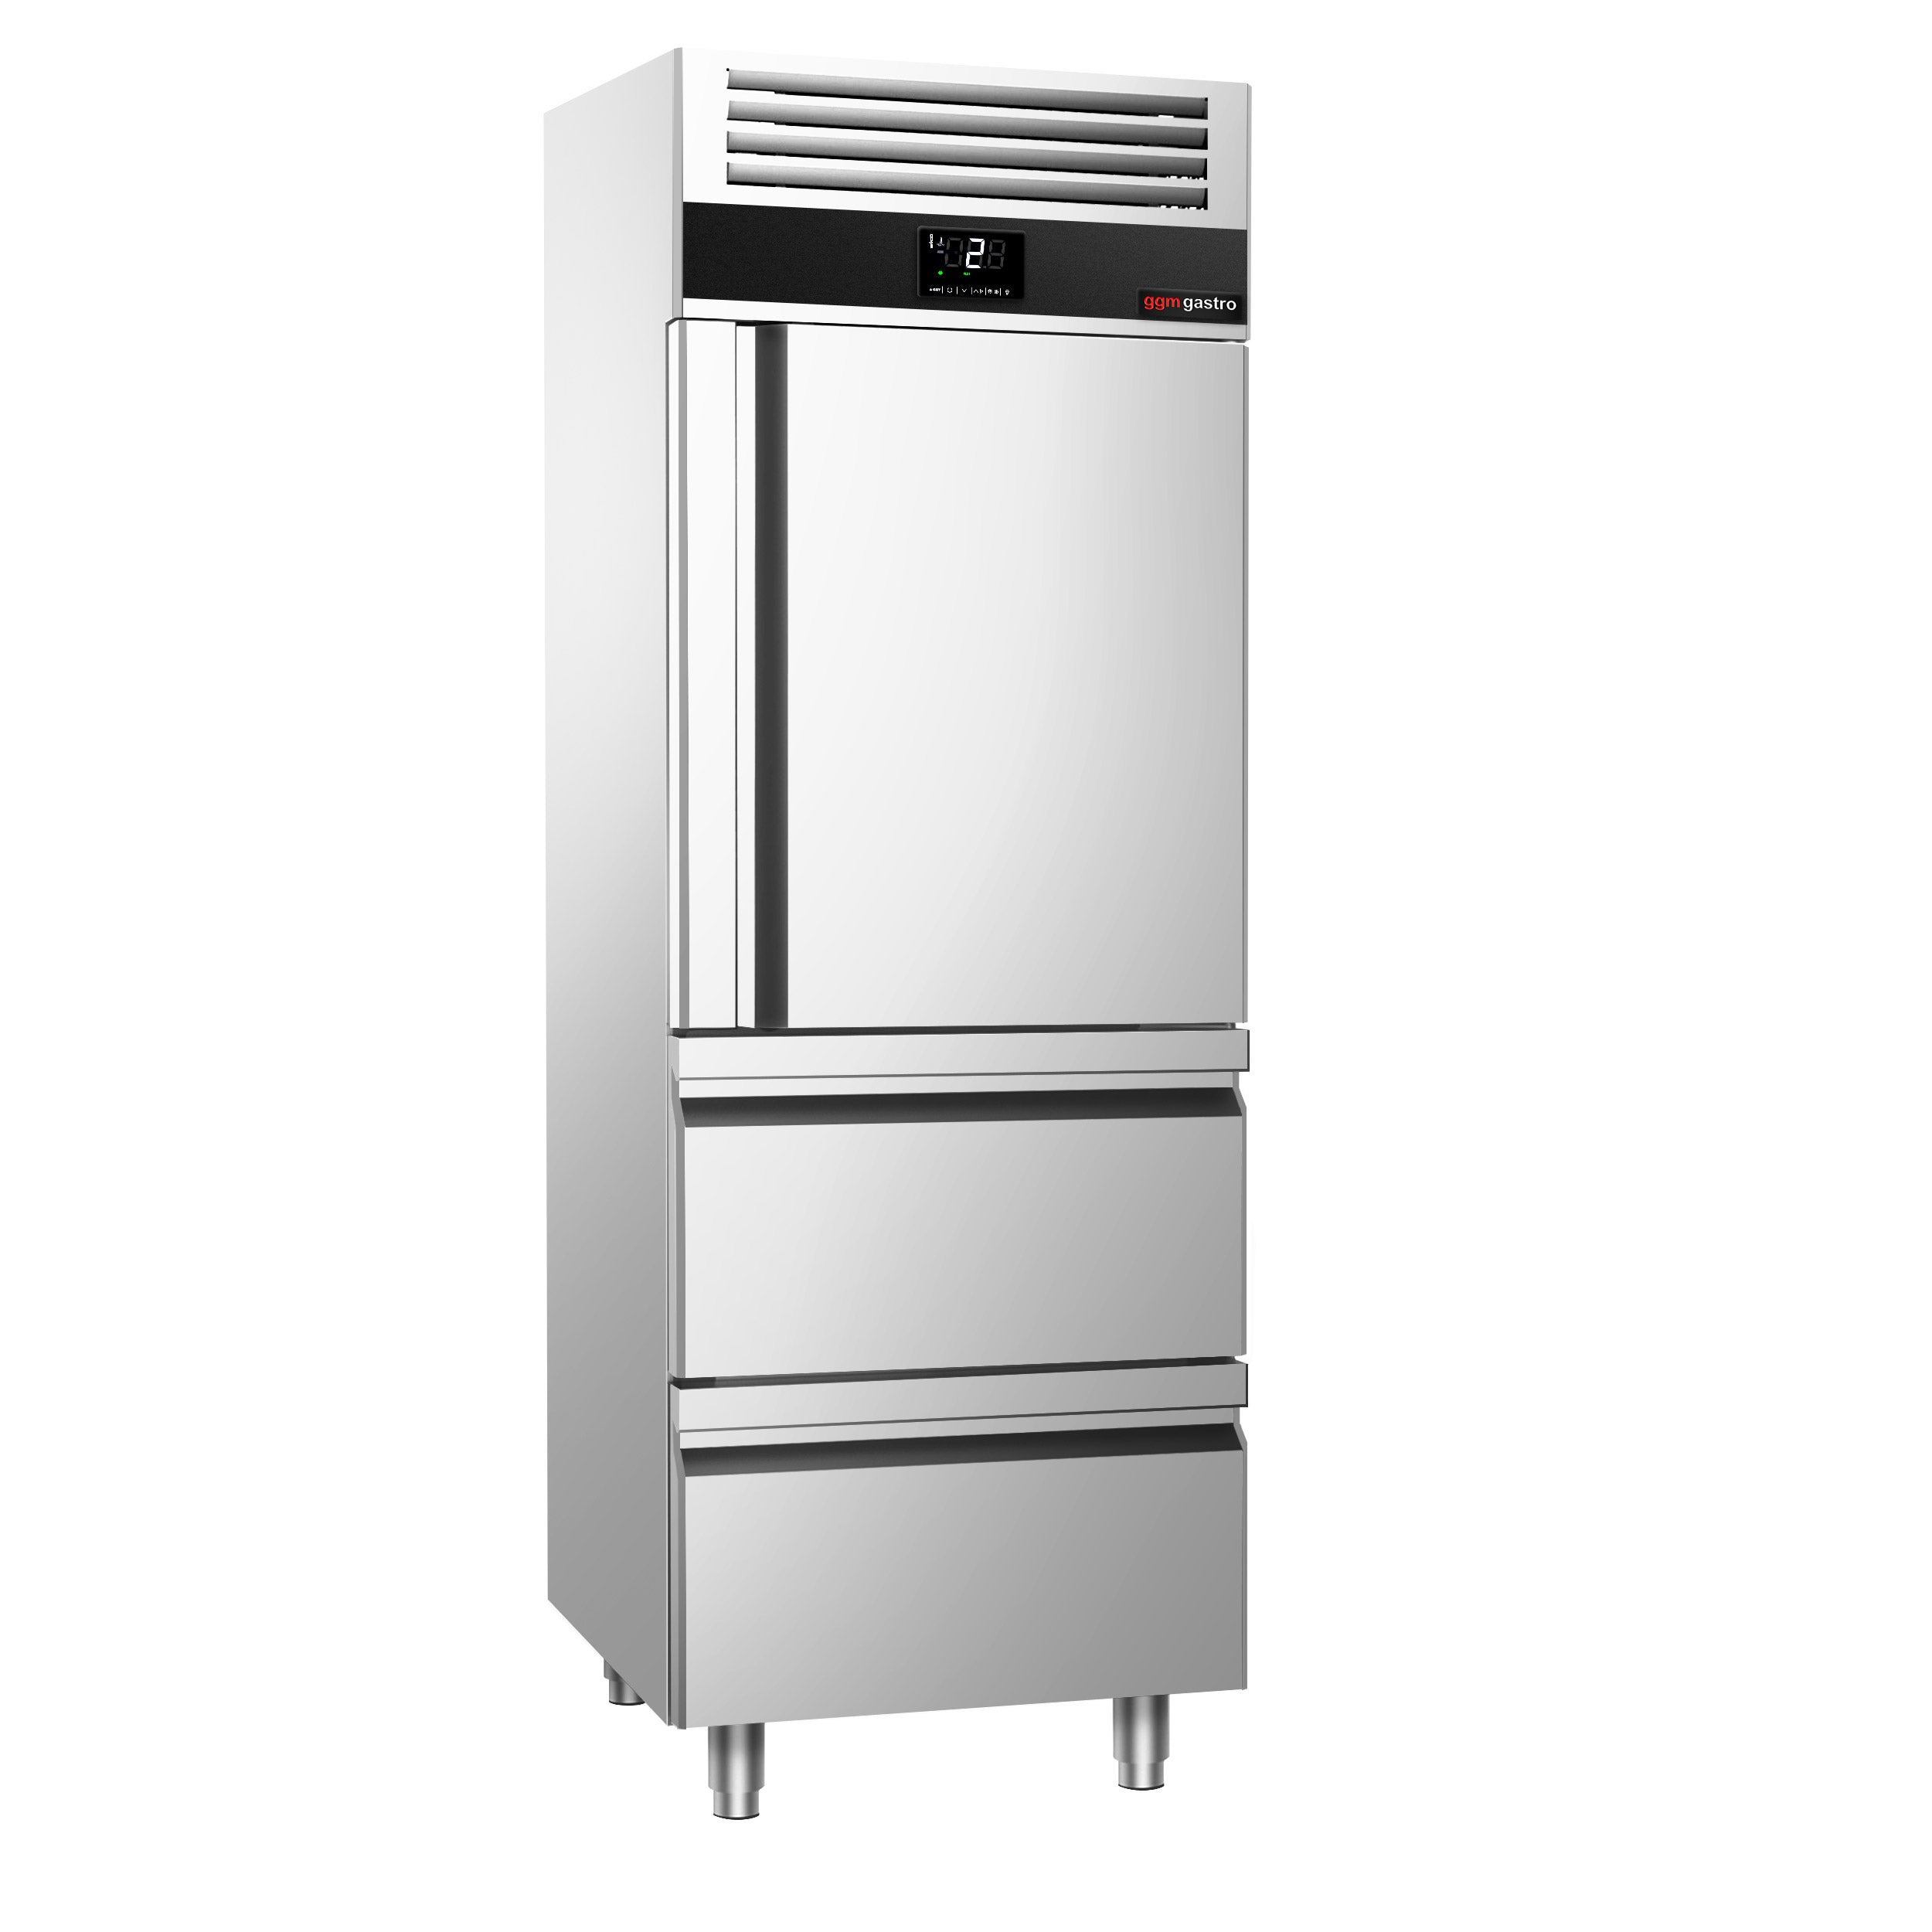 Refrigerator 0.7 x 0.81m with 1 door and 2 drawers 1/2 stainless steel